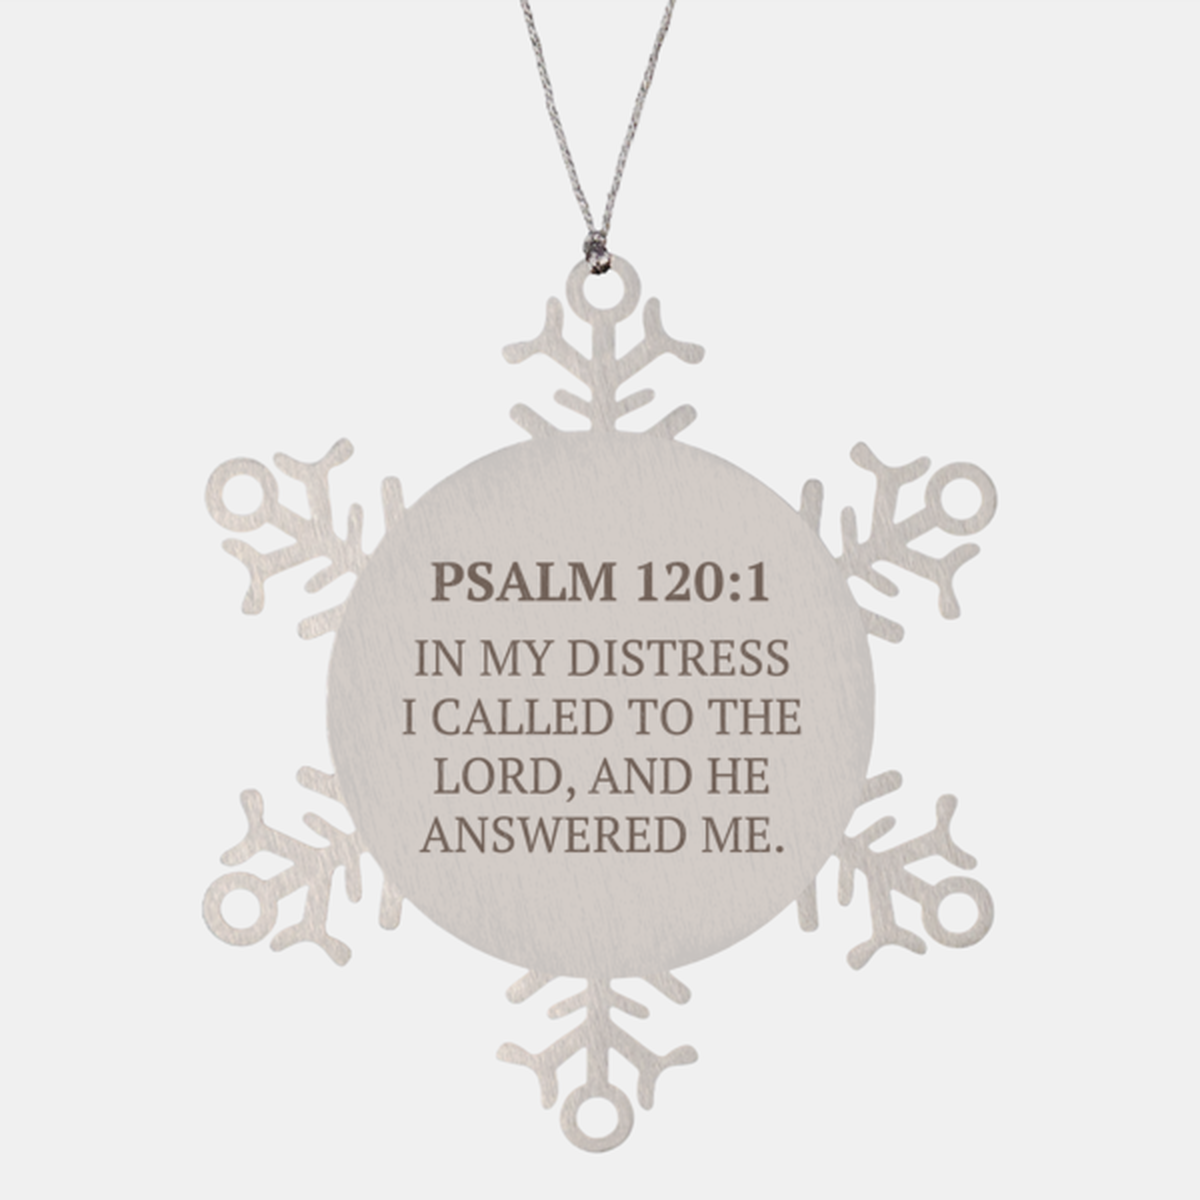 Christian Ornaments For Christmas Tree, In My Distress I Called To The Lord, Religious Christmas Decorations, Scripture Ornaments Gifts, Bible Verse Ornament